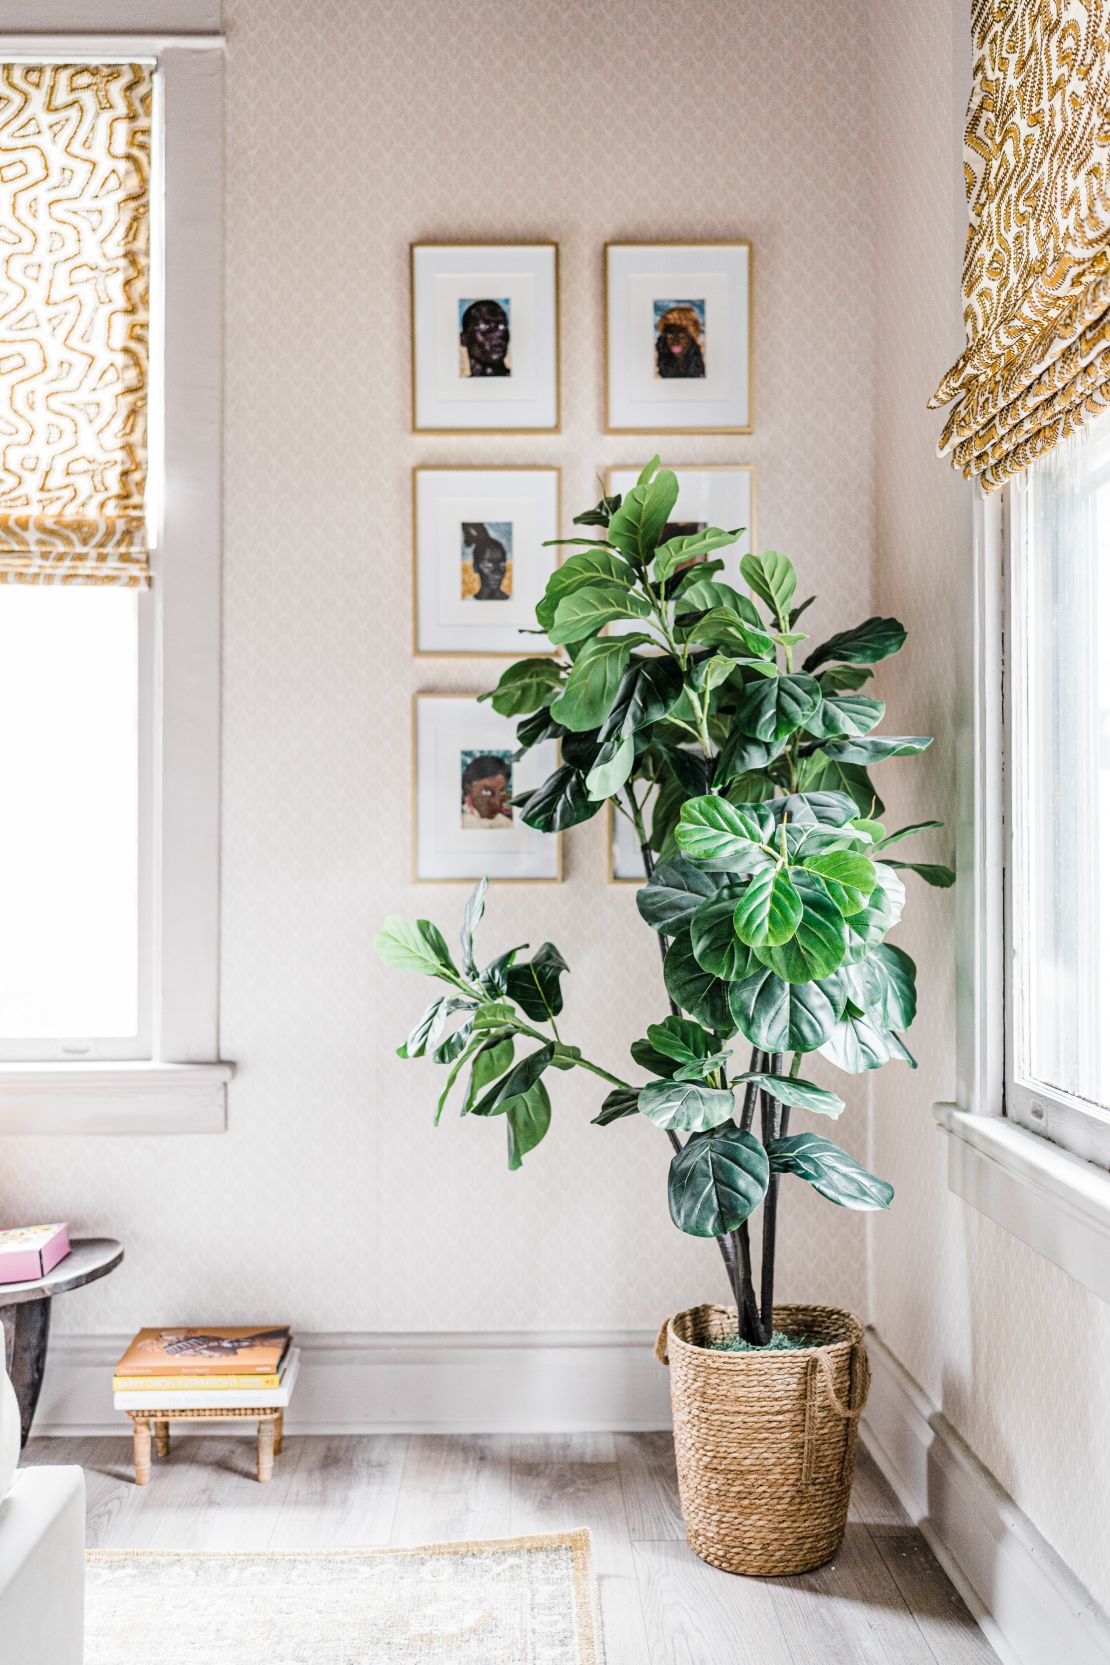 Adding a wood element can be as simple as incorporating a houseplant, such as this fiddle leaf fig, into your decor.